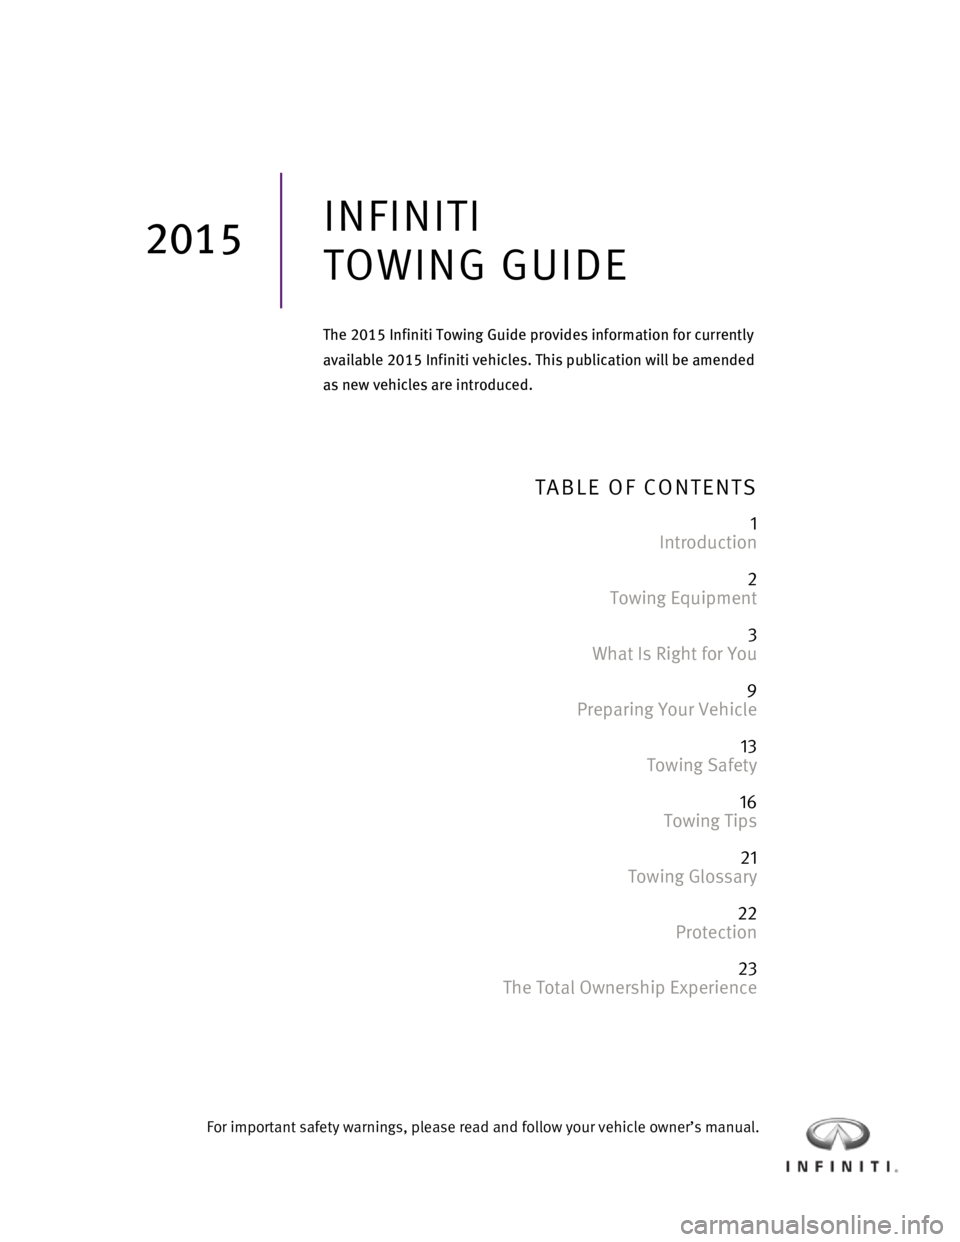 INFINITI QX60 2015  Towing Guide   
 
 
 
 
 
 
 
 
 
TABLE OF CONTENTS  
 
1 
Introduction 
 
2 
Towing Equipment 
 
3 
What Is Right for You 
 
9 
Preparing Your Vehicle 
 
13 
Towing Safety 
 
16 
Towing Tips 
 
21 
Towing Glossar